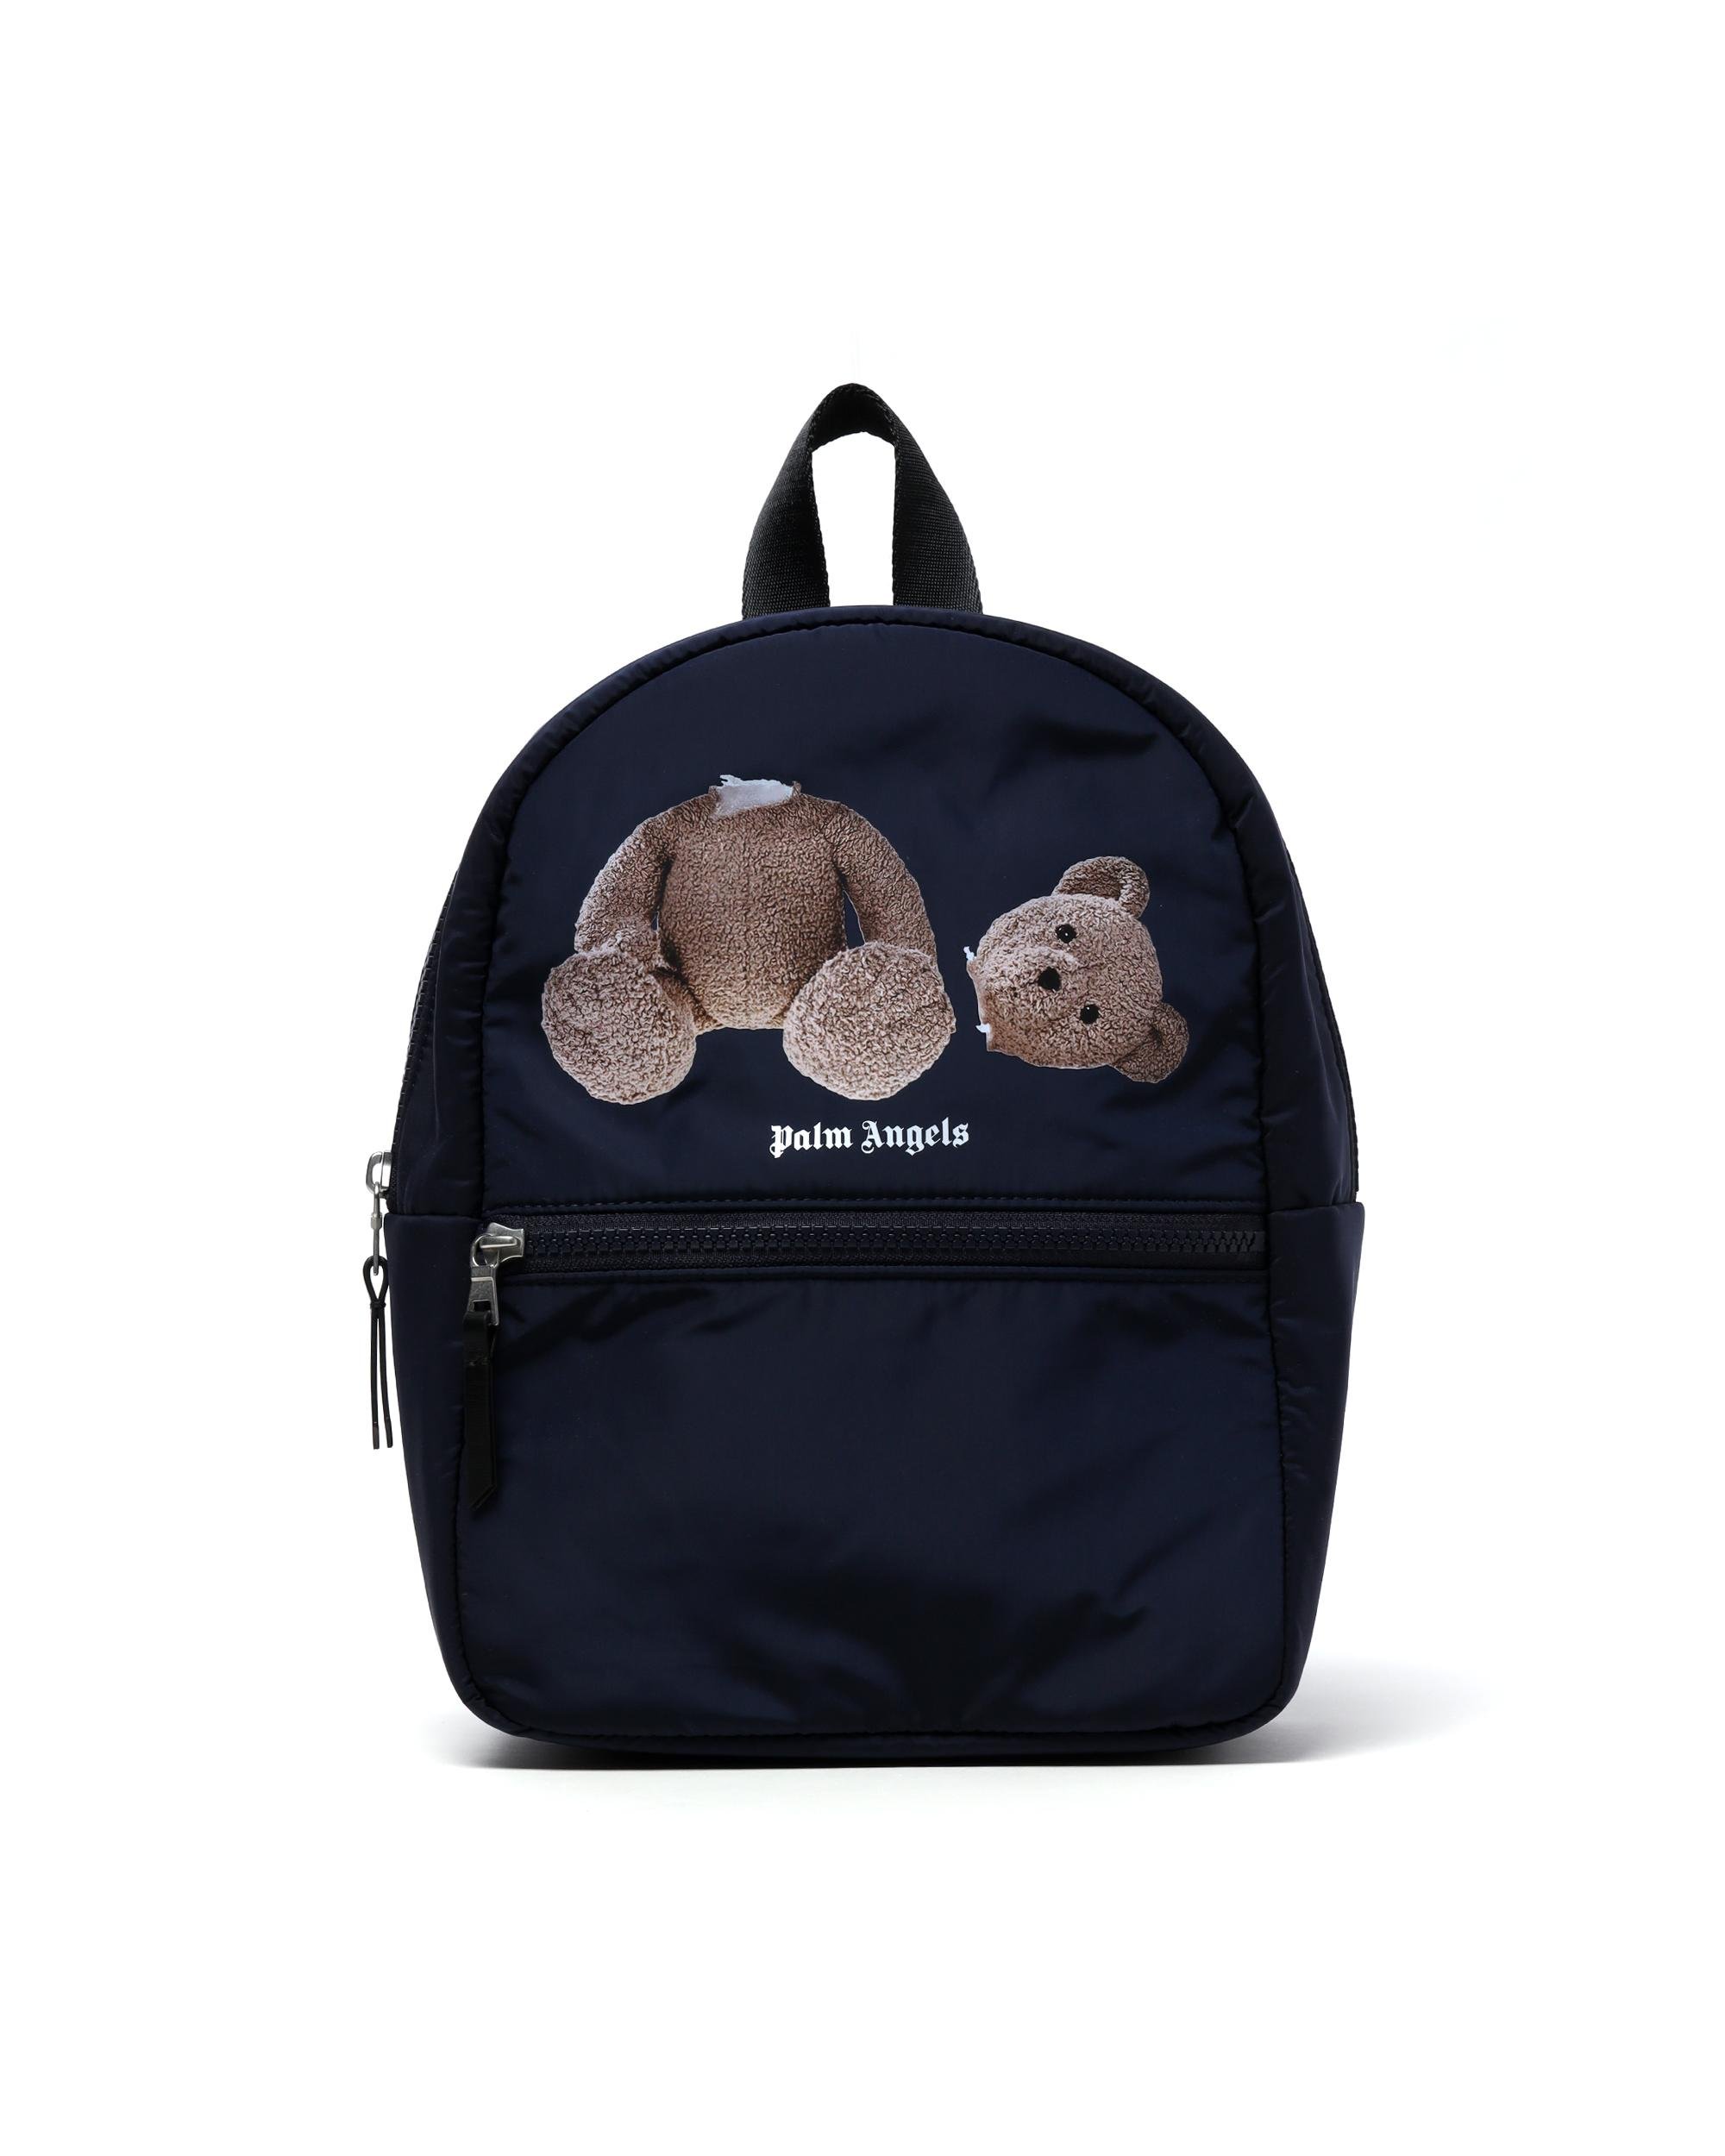 Kids bear backpack by PALM ANGELS